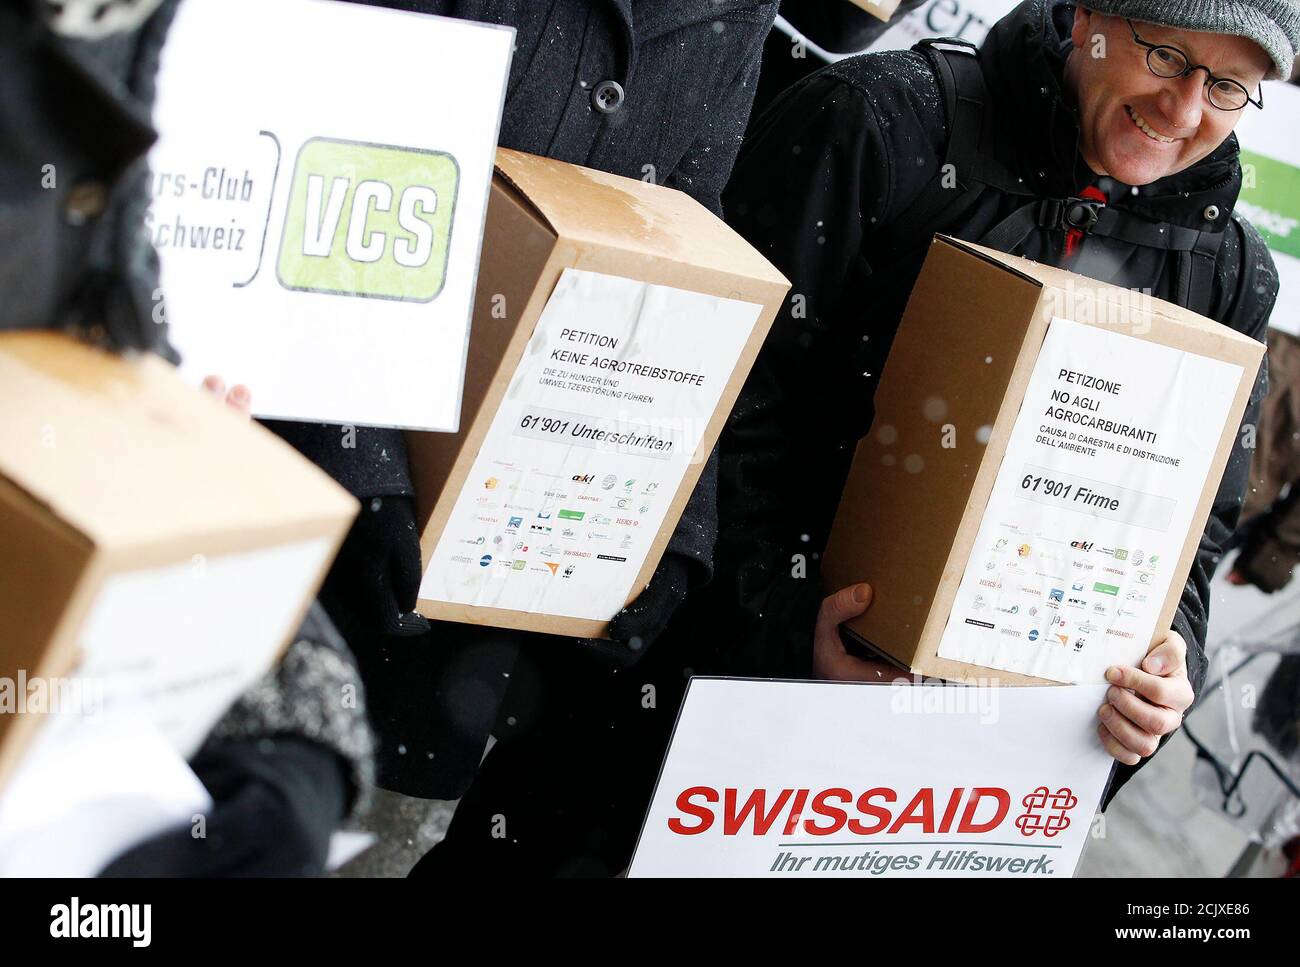 Members of the different aid organisation carry boxes with 61,901 signatures of the signed petition 'No agro fuels - no hunger and no destruction of the environment' ('Keine Agrotreibstoffe, die zu Hunger und Umweltzerstoerung fuehren') outside the parliament building in Bern February 24, 2011. REUTERS/Pascal Lauener (SWITZERLAND - Tags: POLITICS CIVIL UNREST ENVIRONMENT) Stock Photo